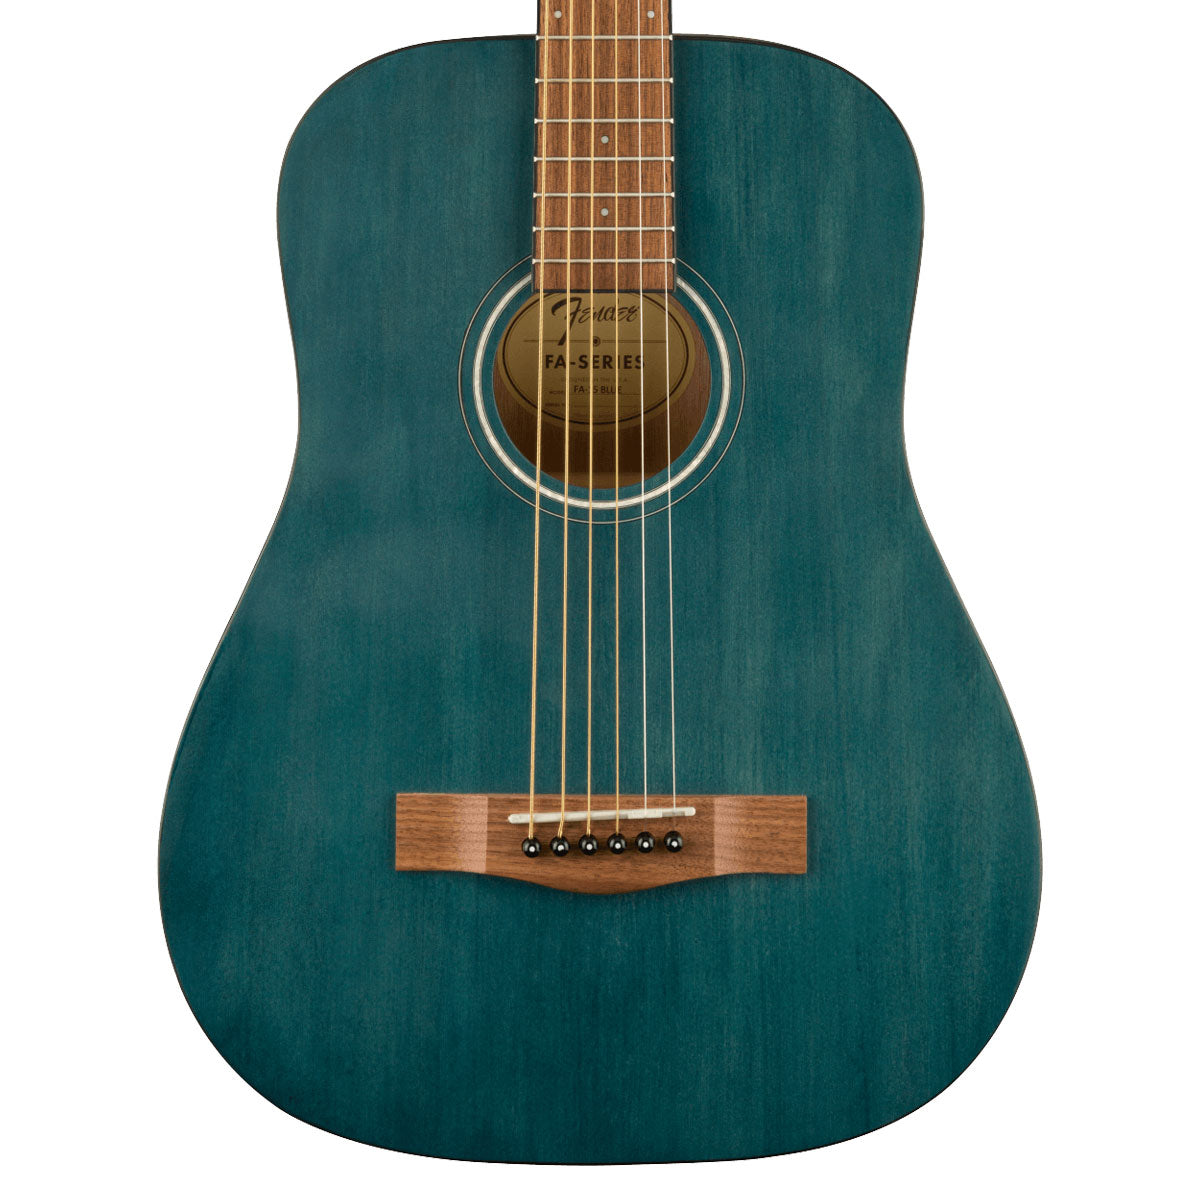 Close-up top view of Fender FA-15 3/4 Steel Acoustic Guitar - Blue showing body and portion of fingerboard